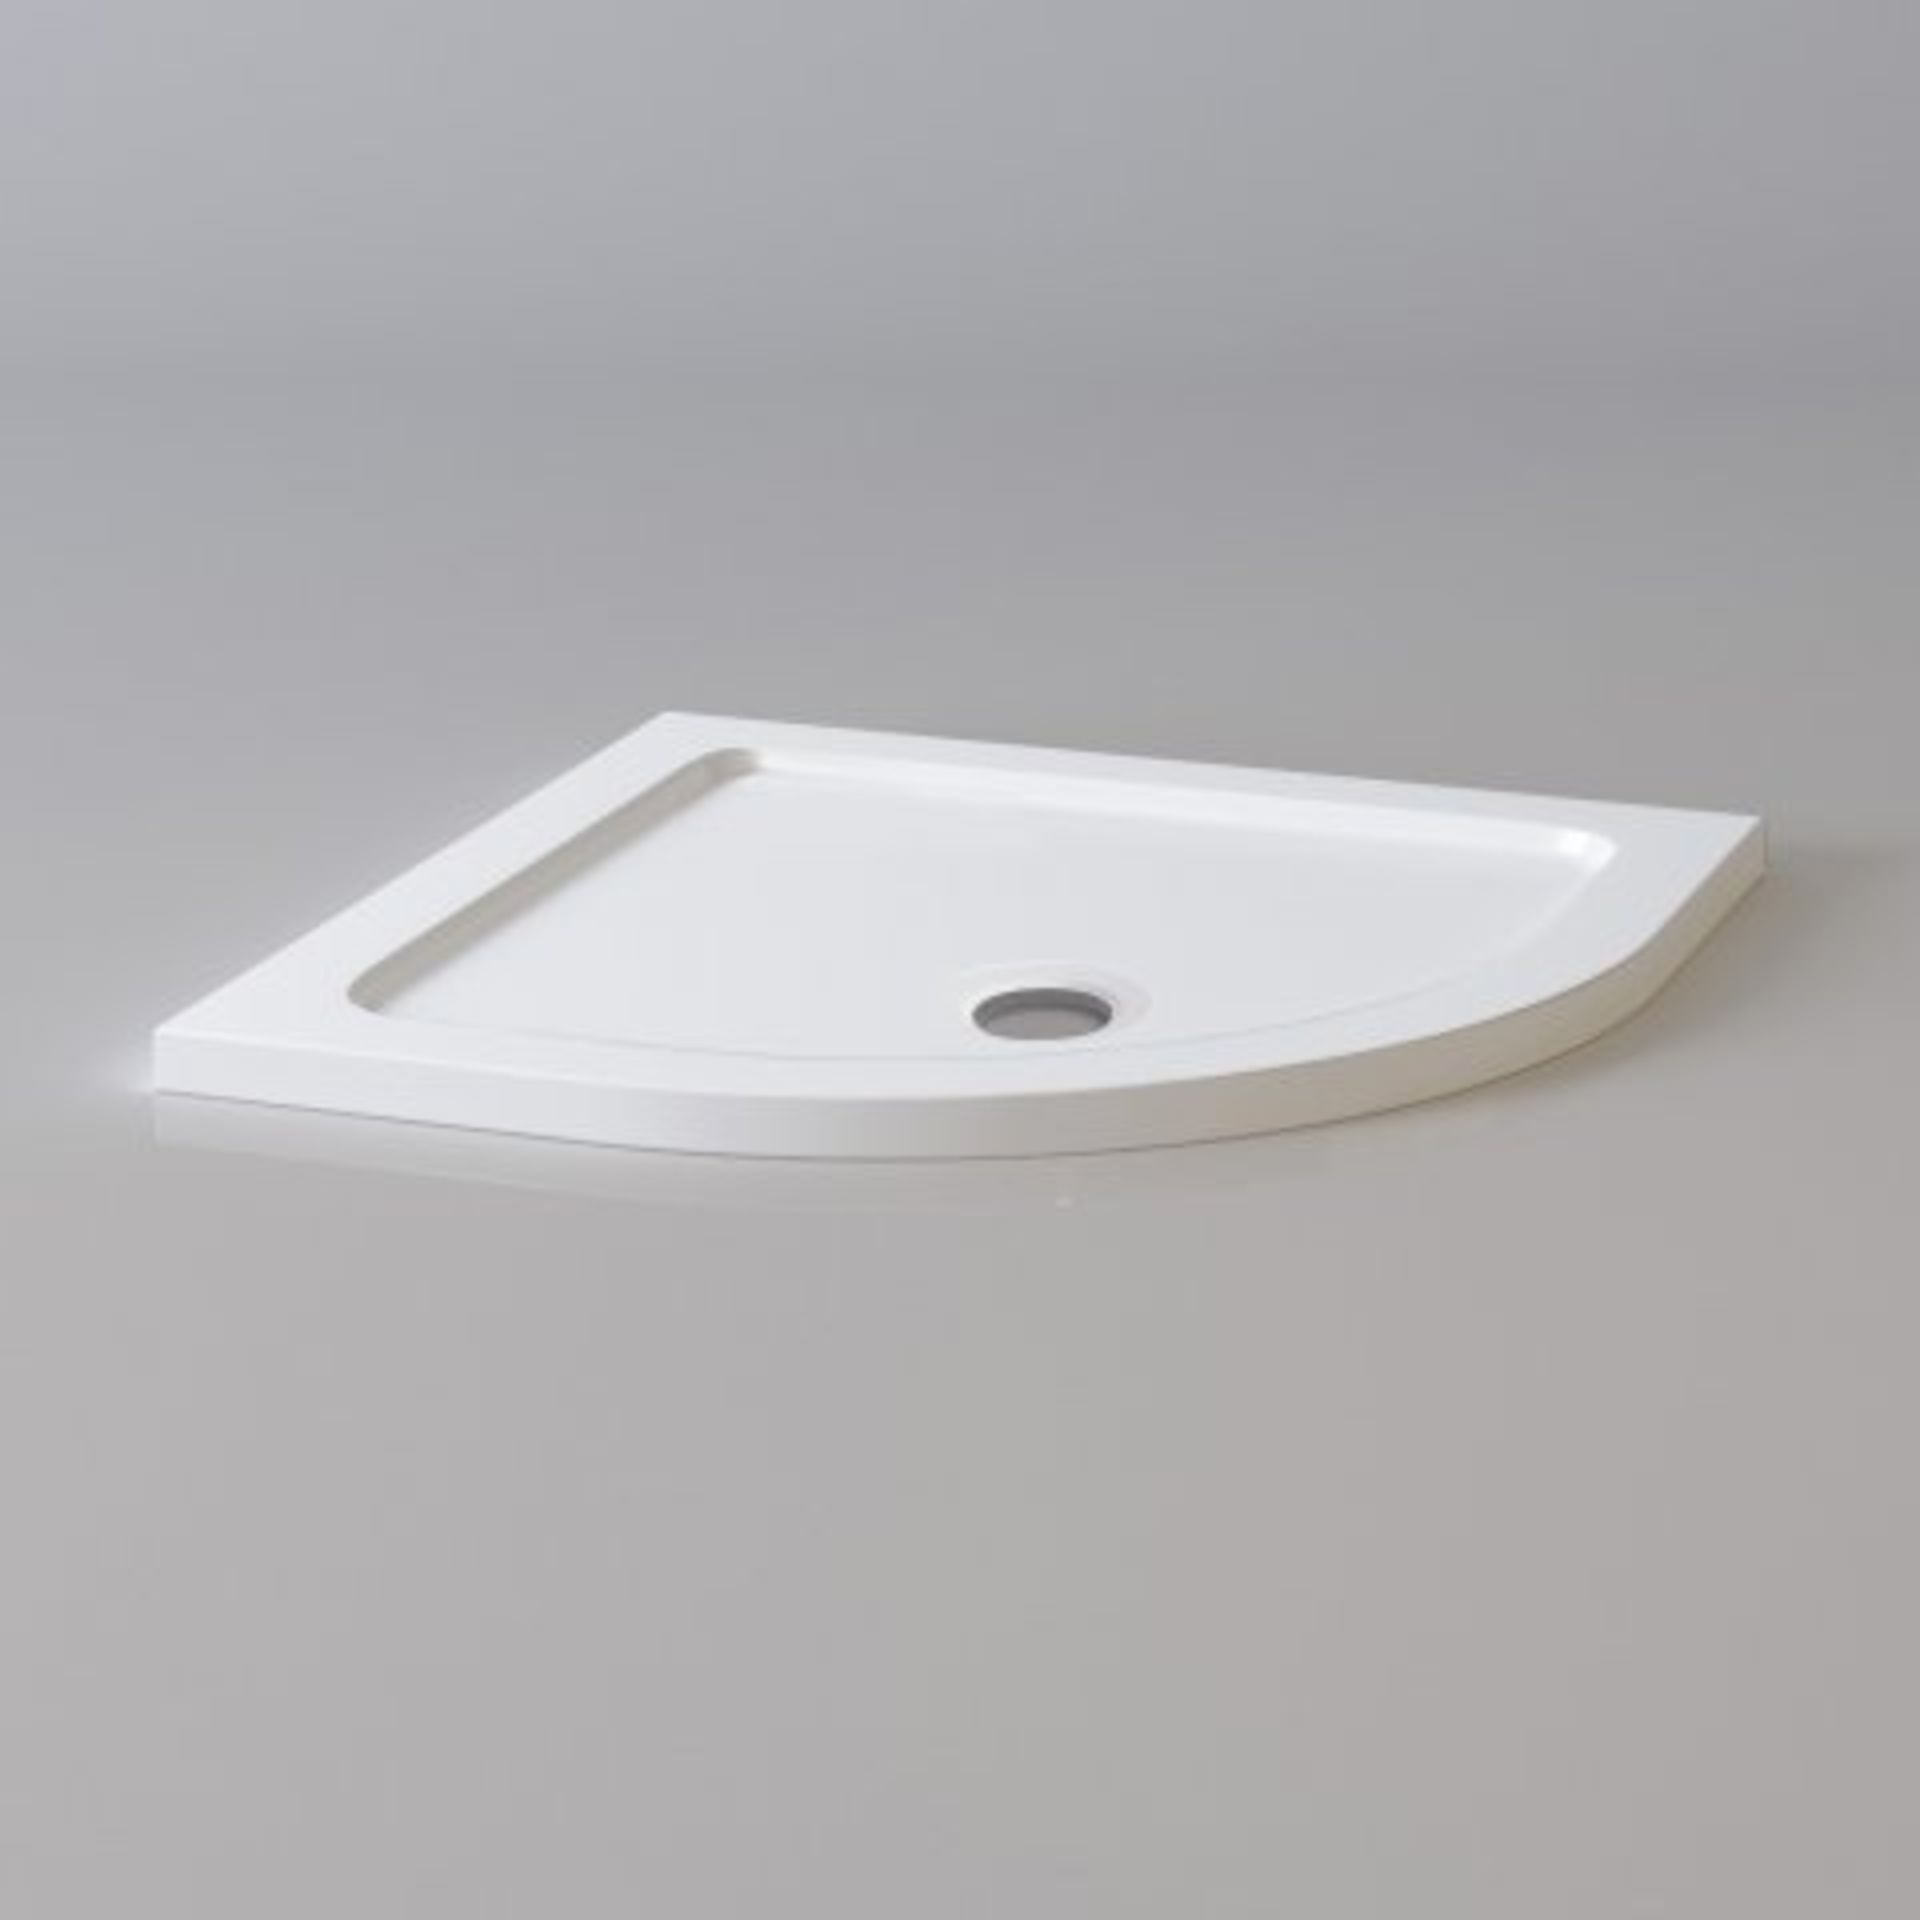 (N152) 1000x1000mm Quadrant Ultra Slim Stone Shower Tray. RRP £299.99. Designed and made carefully